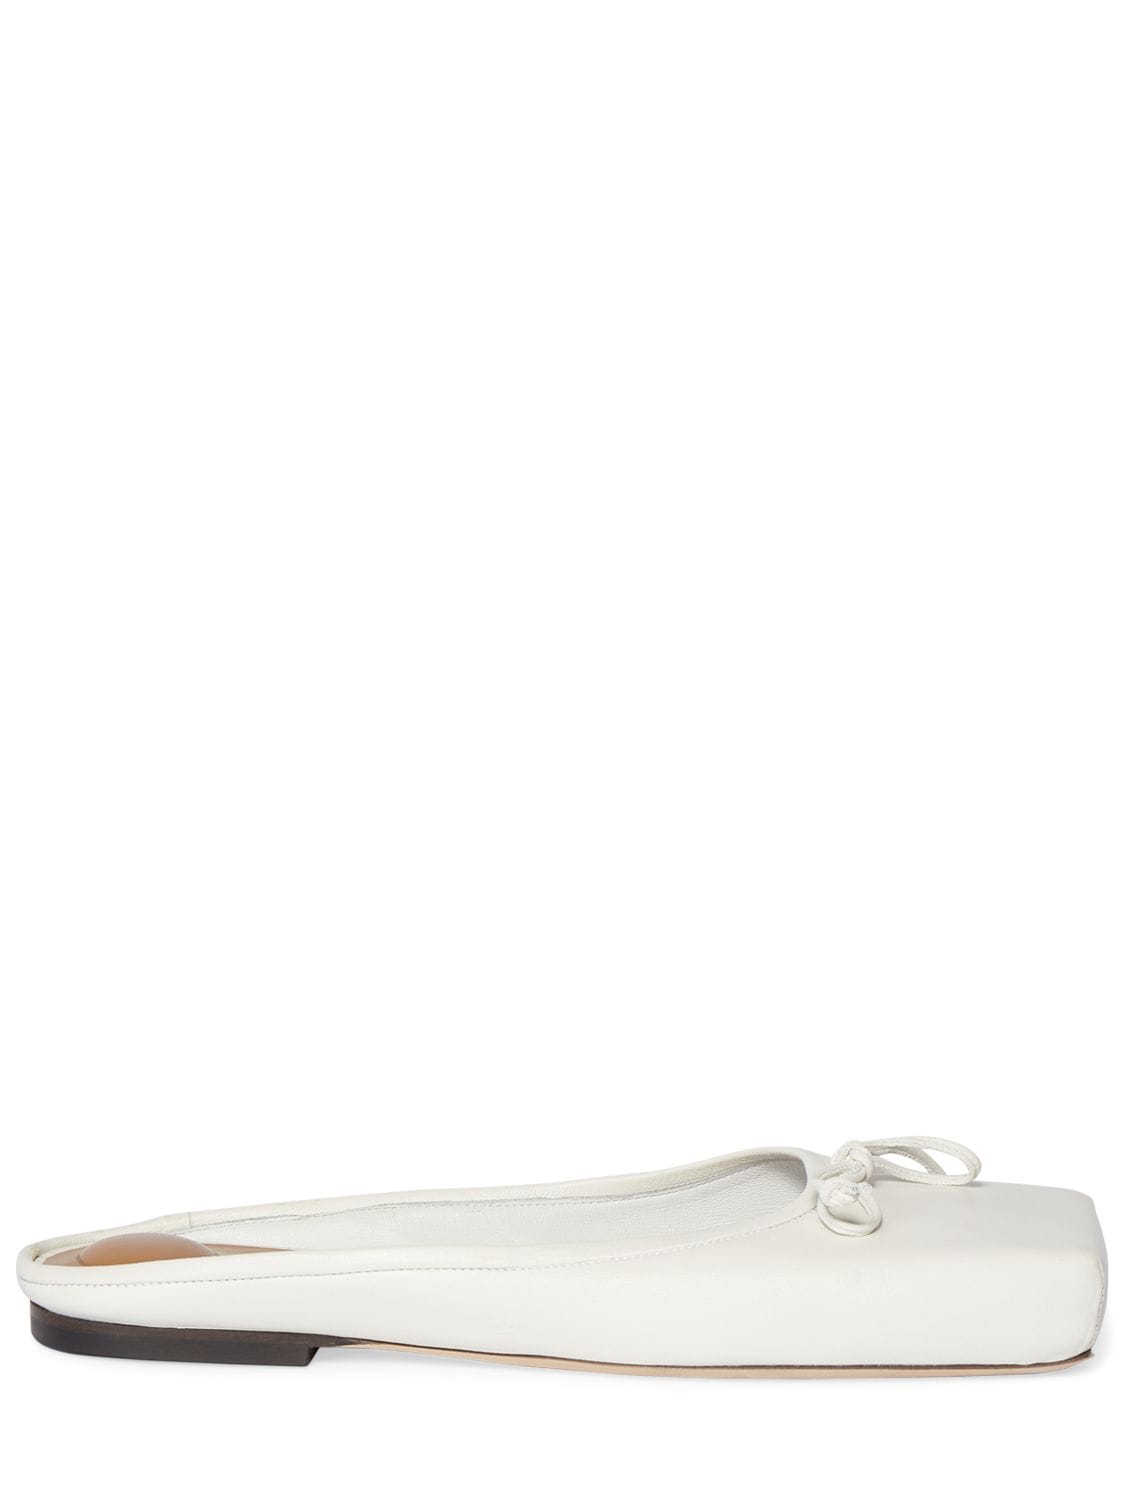 JACQUEMUS 5mm Flat Leather Mules